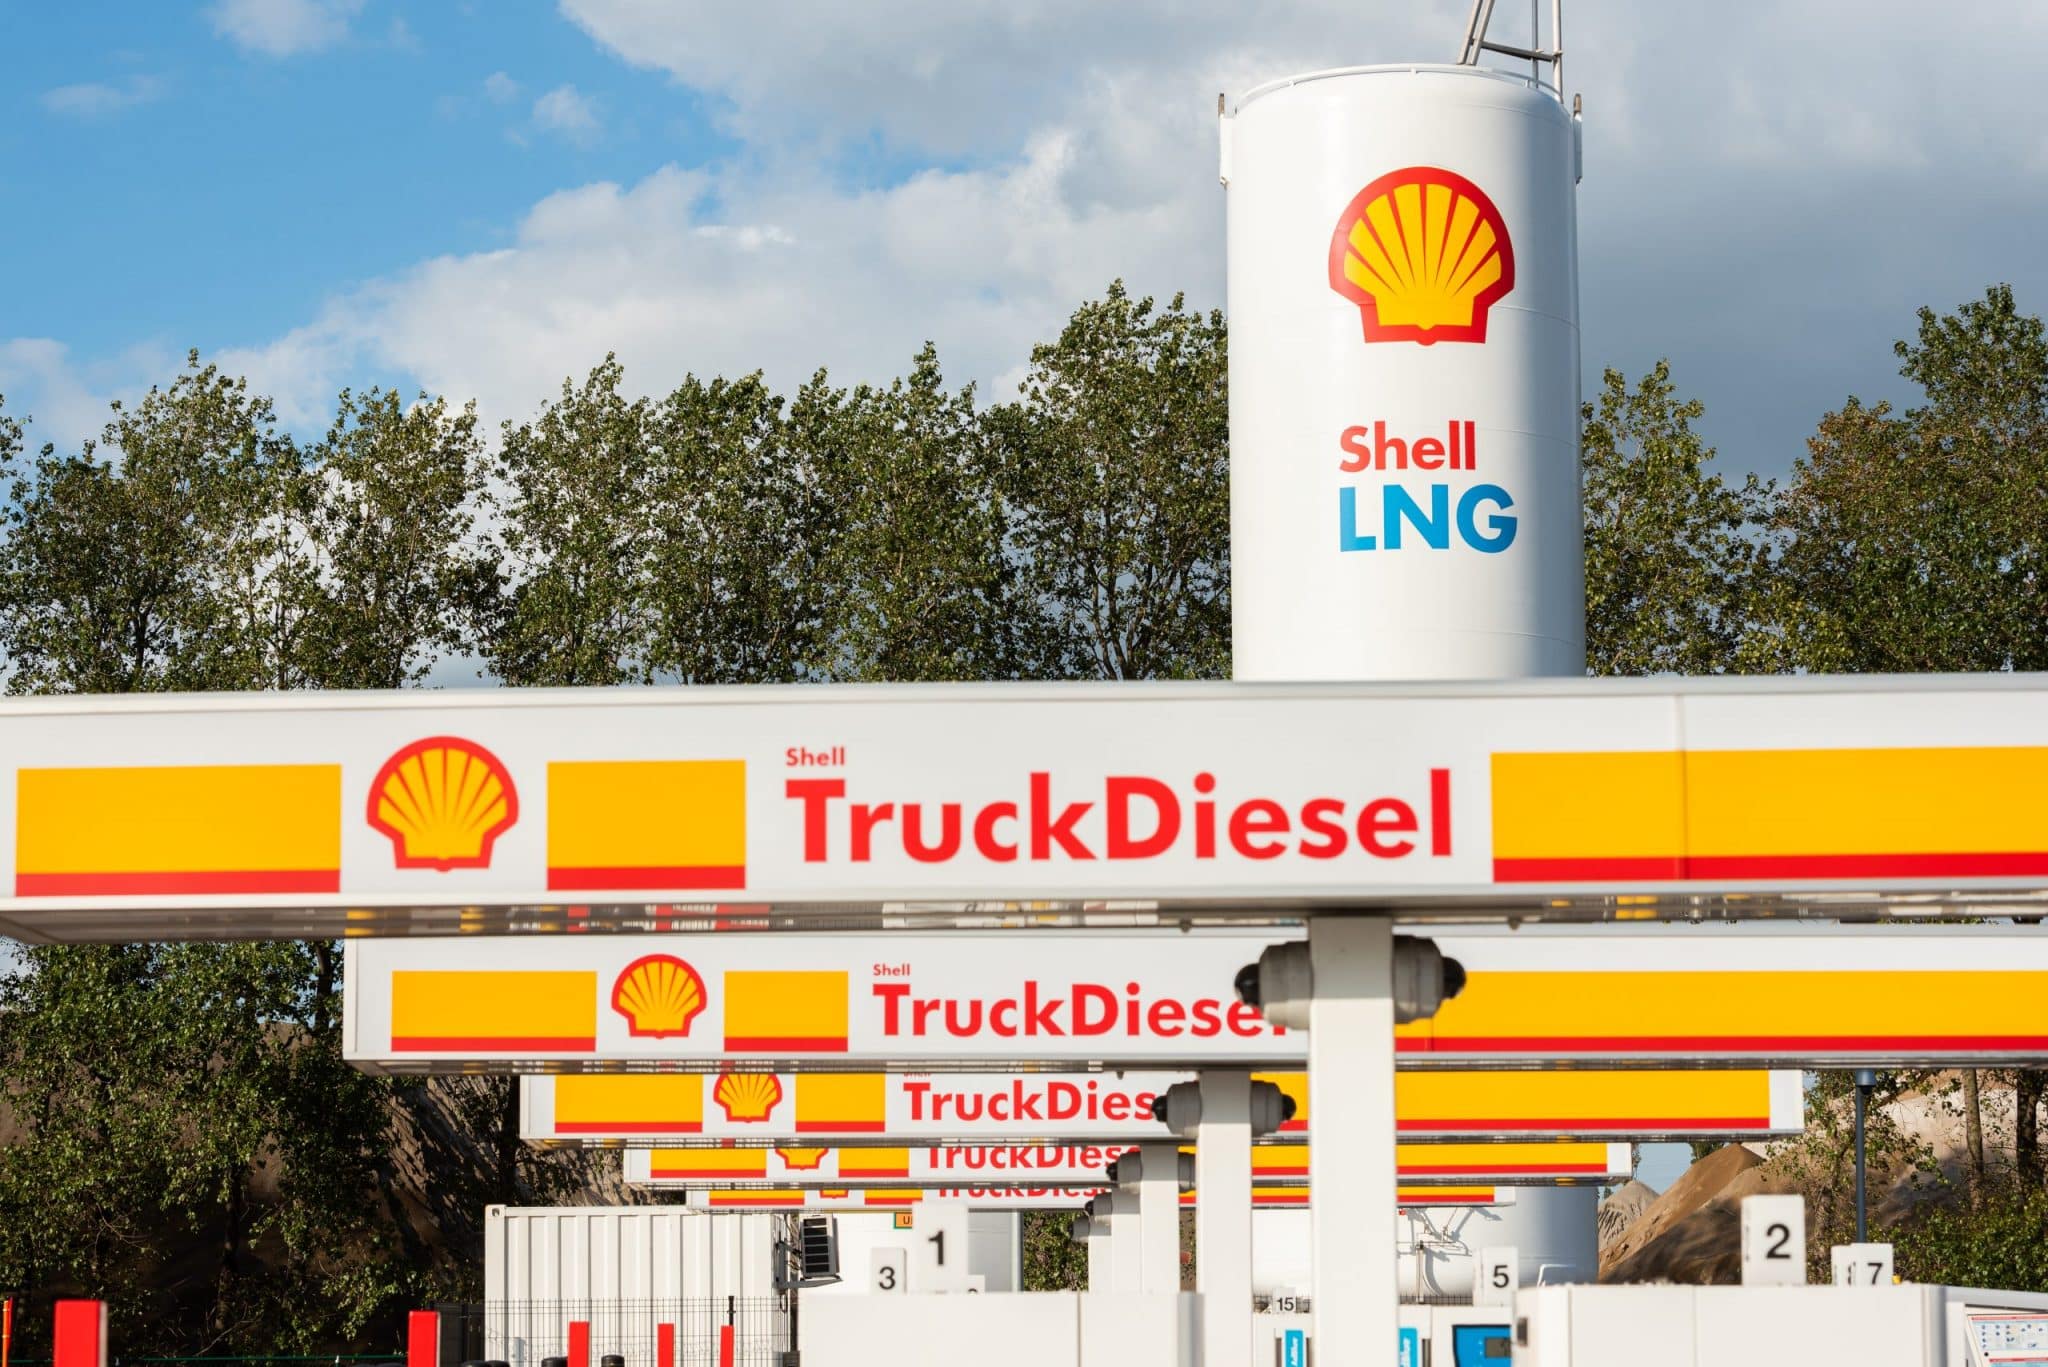 Shell expects 50% rise in global LNG demand by 2040